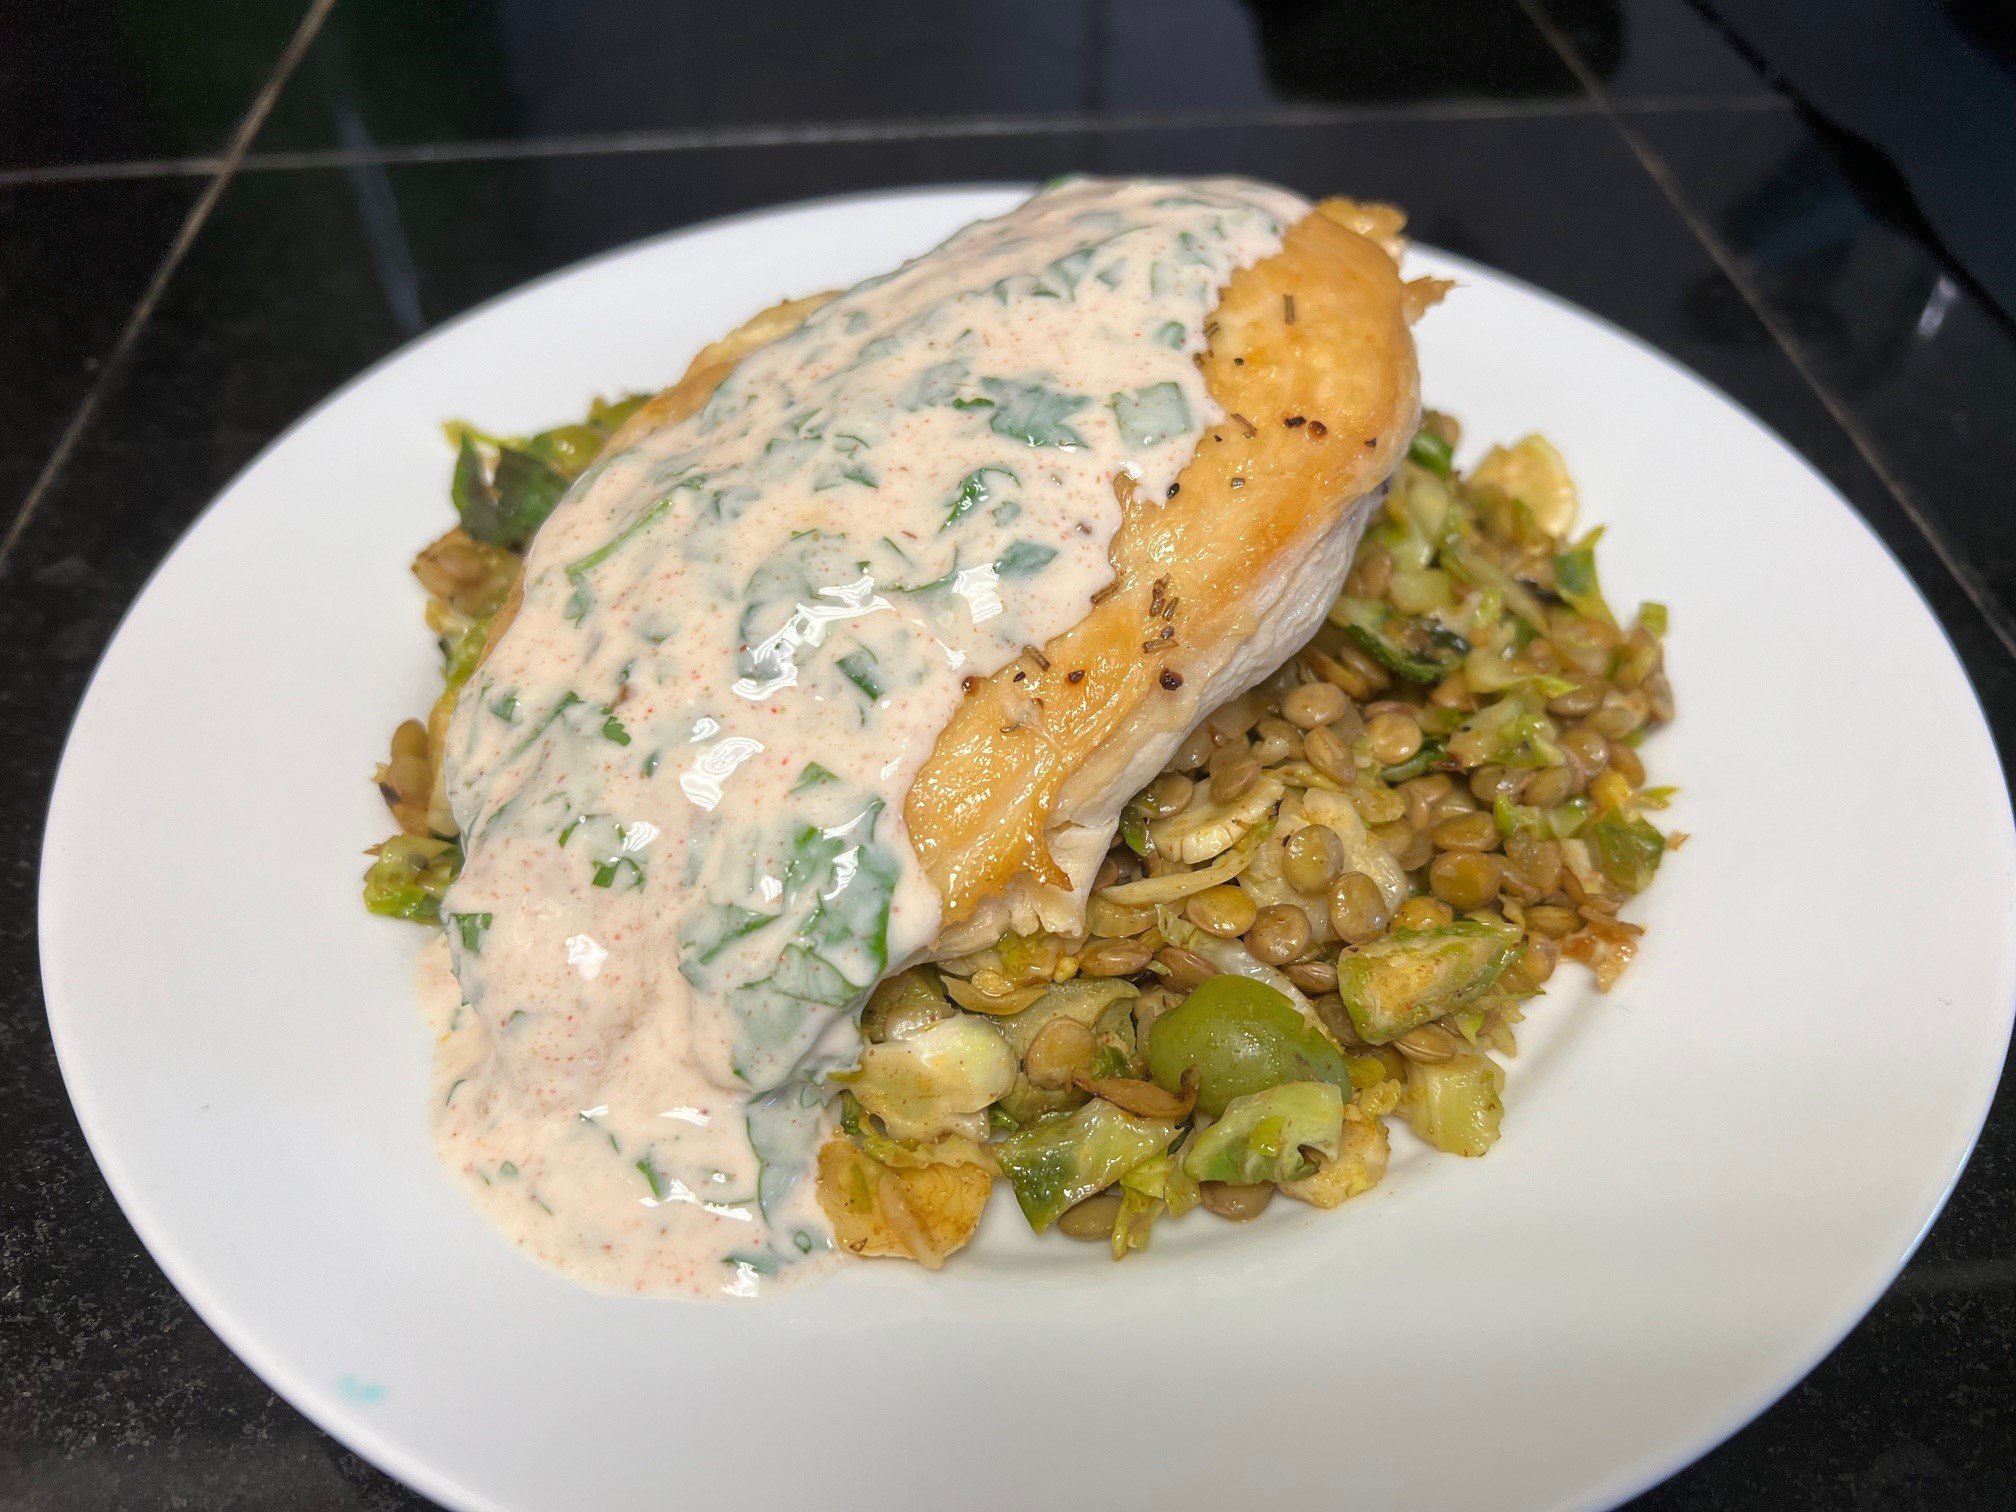 Chicken Breast with Brussels Sprout Lentil Salad and Yogurt Cilantro Dressing